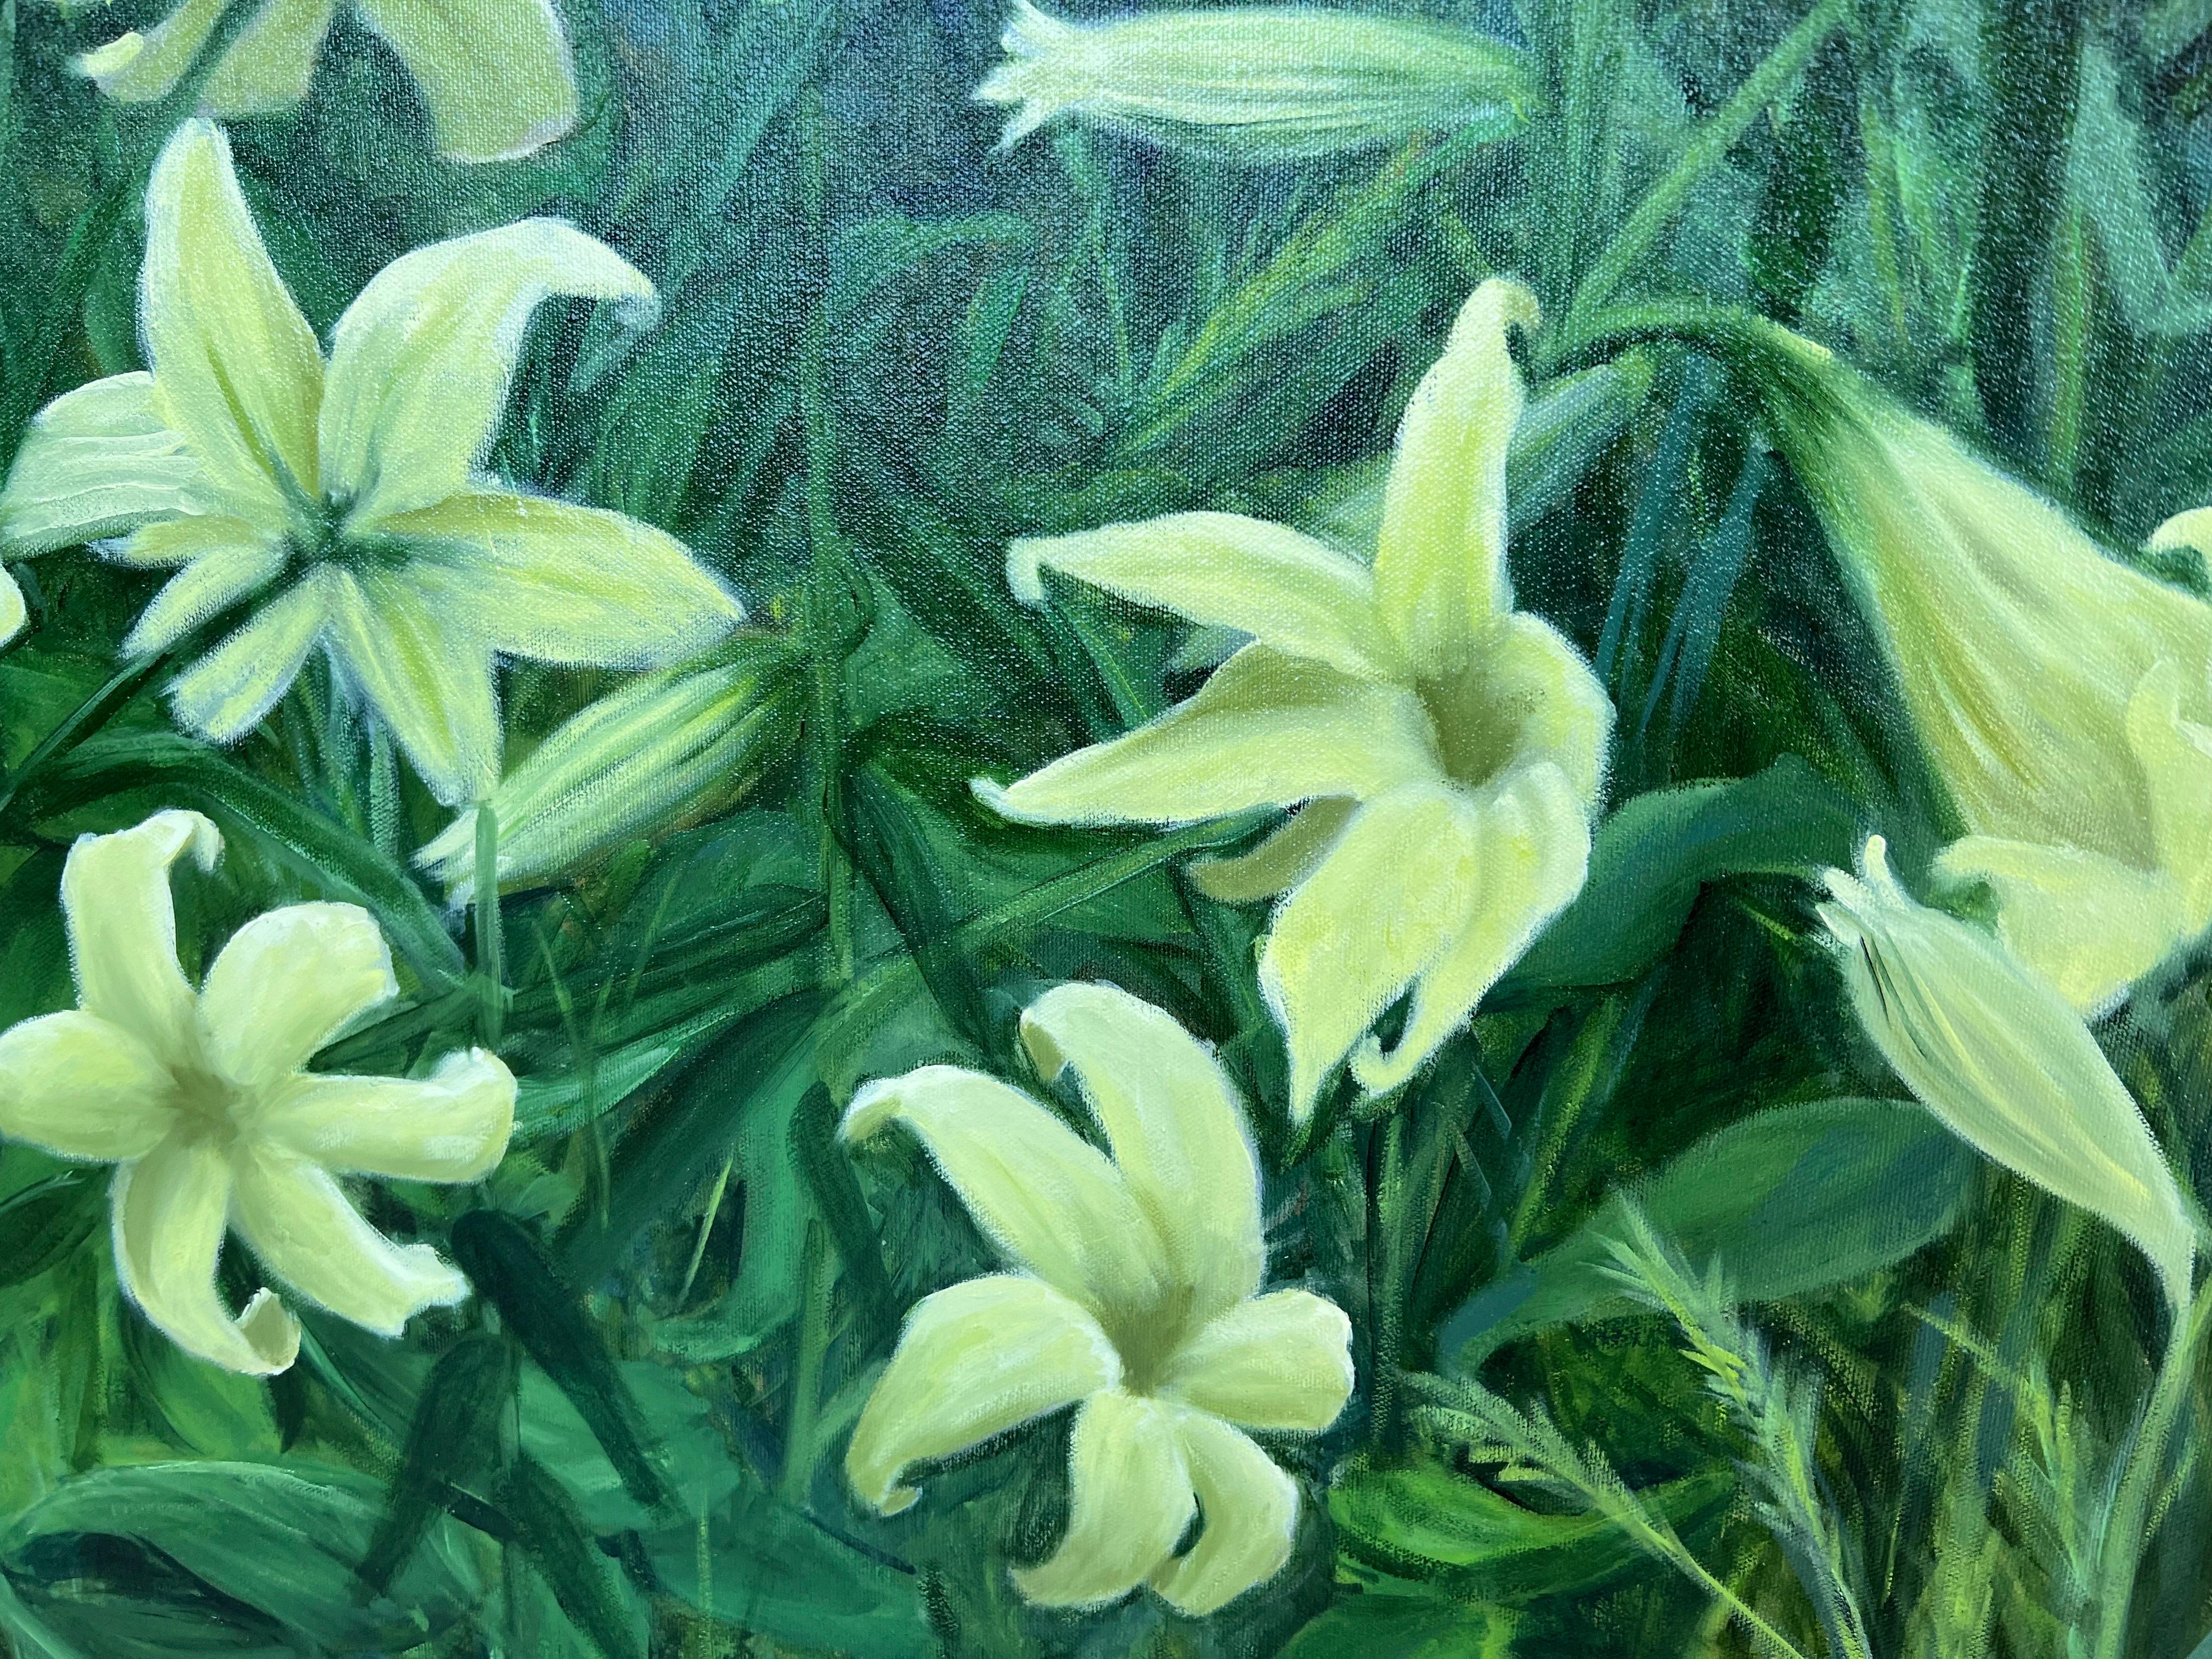 Lillies Among the Weeds by Ginny Williams Framed Still Life Oil on Canvas 4